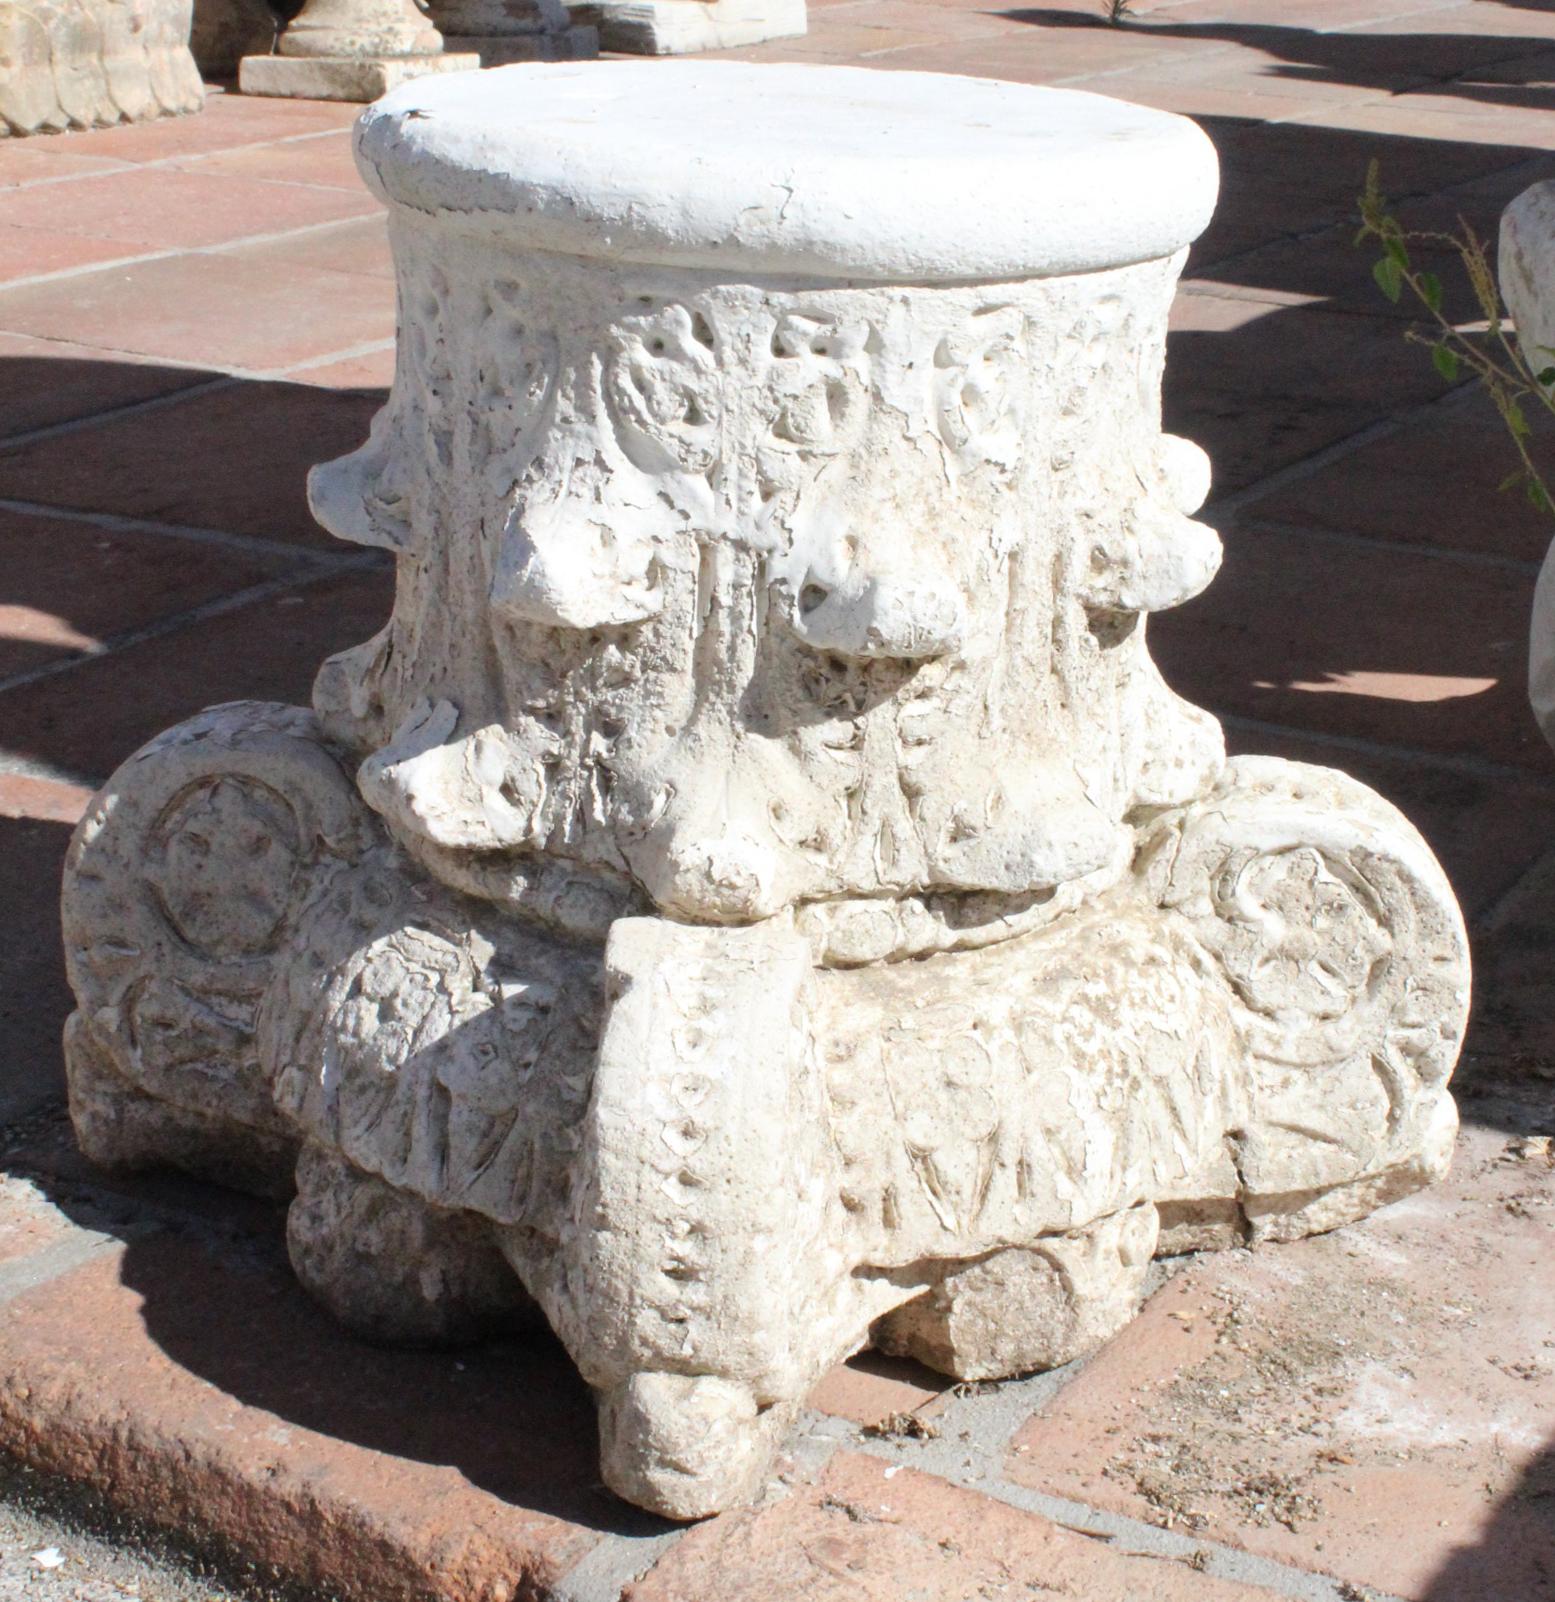 1950s pair of Spanish sandstone capitals in the style of Al-Andalus architecture, combining a Visigoth capital with geometric engravings, representing the merge of western and eastern cultures.